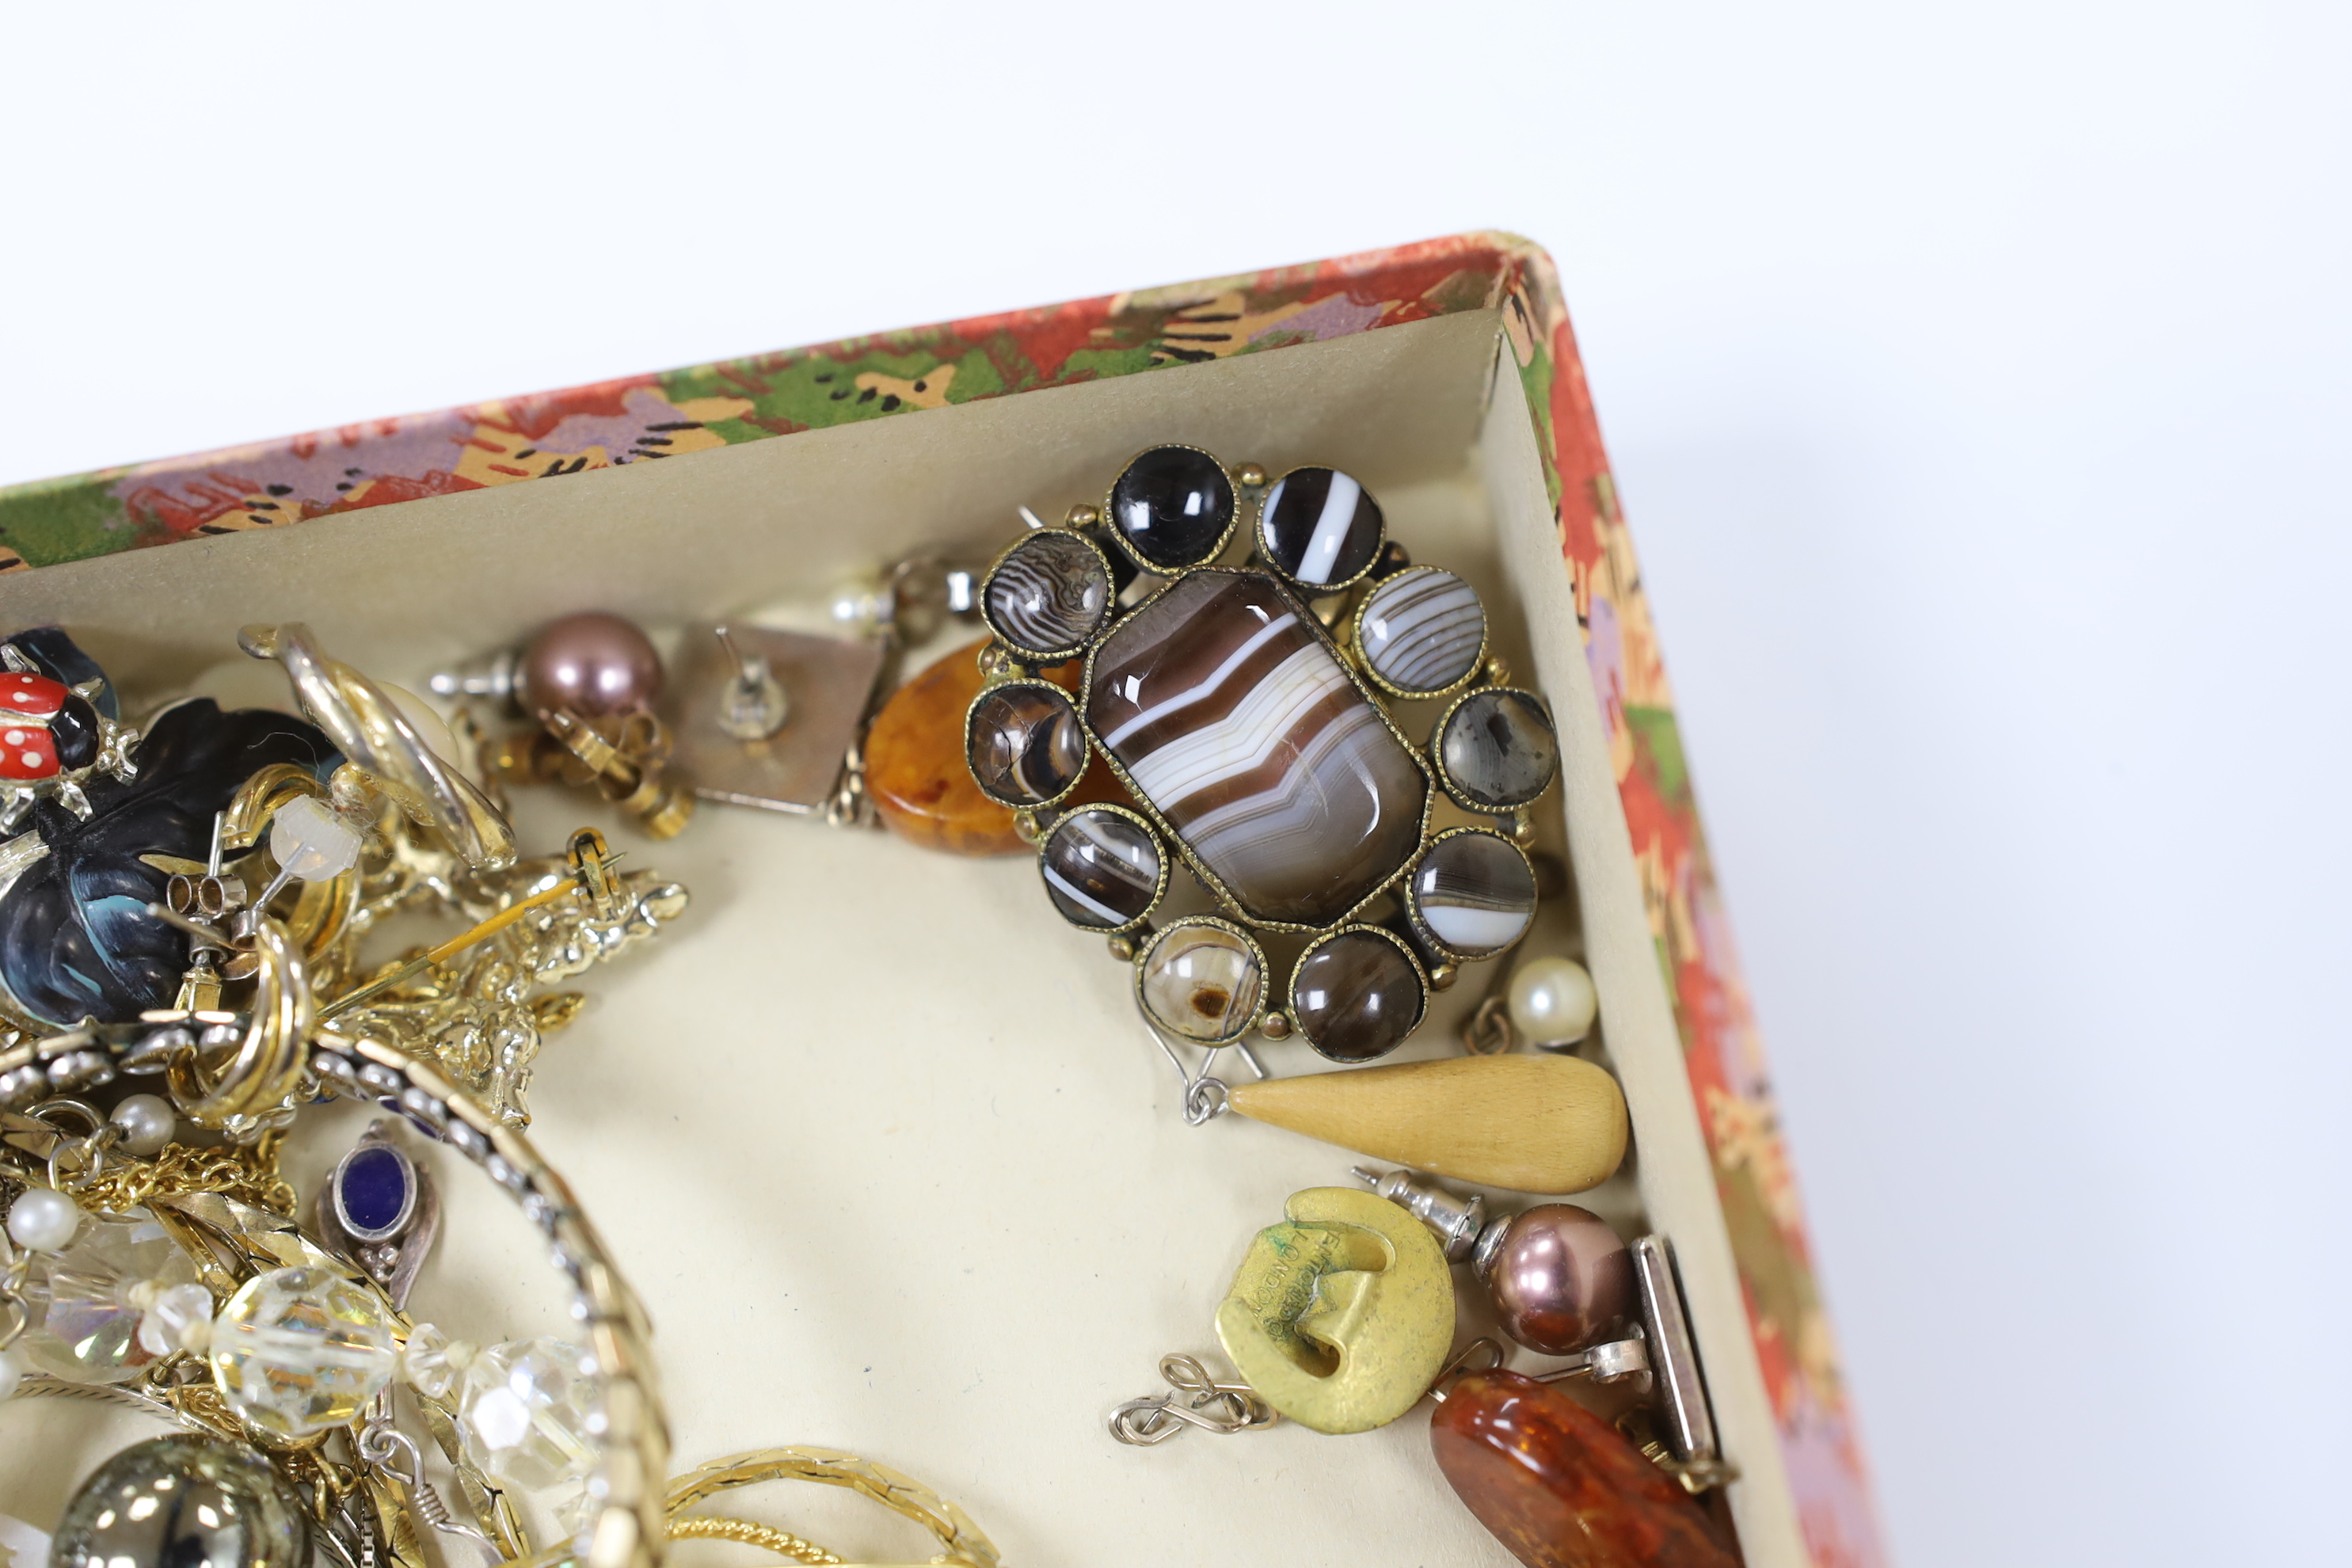 Assorted costume jewellery and wrist watches, including an agate set brooch.